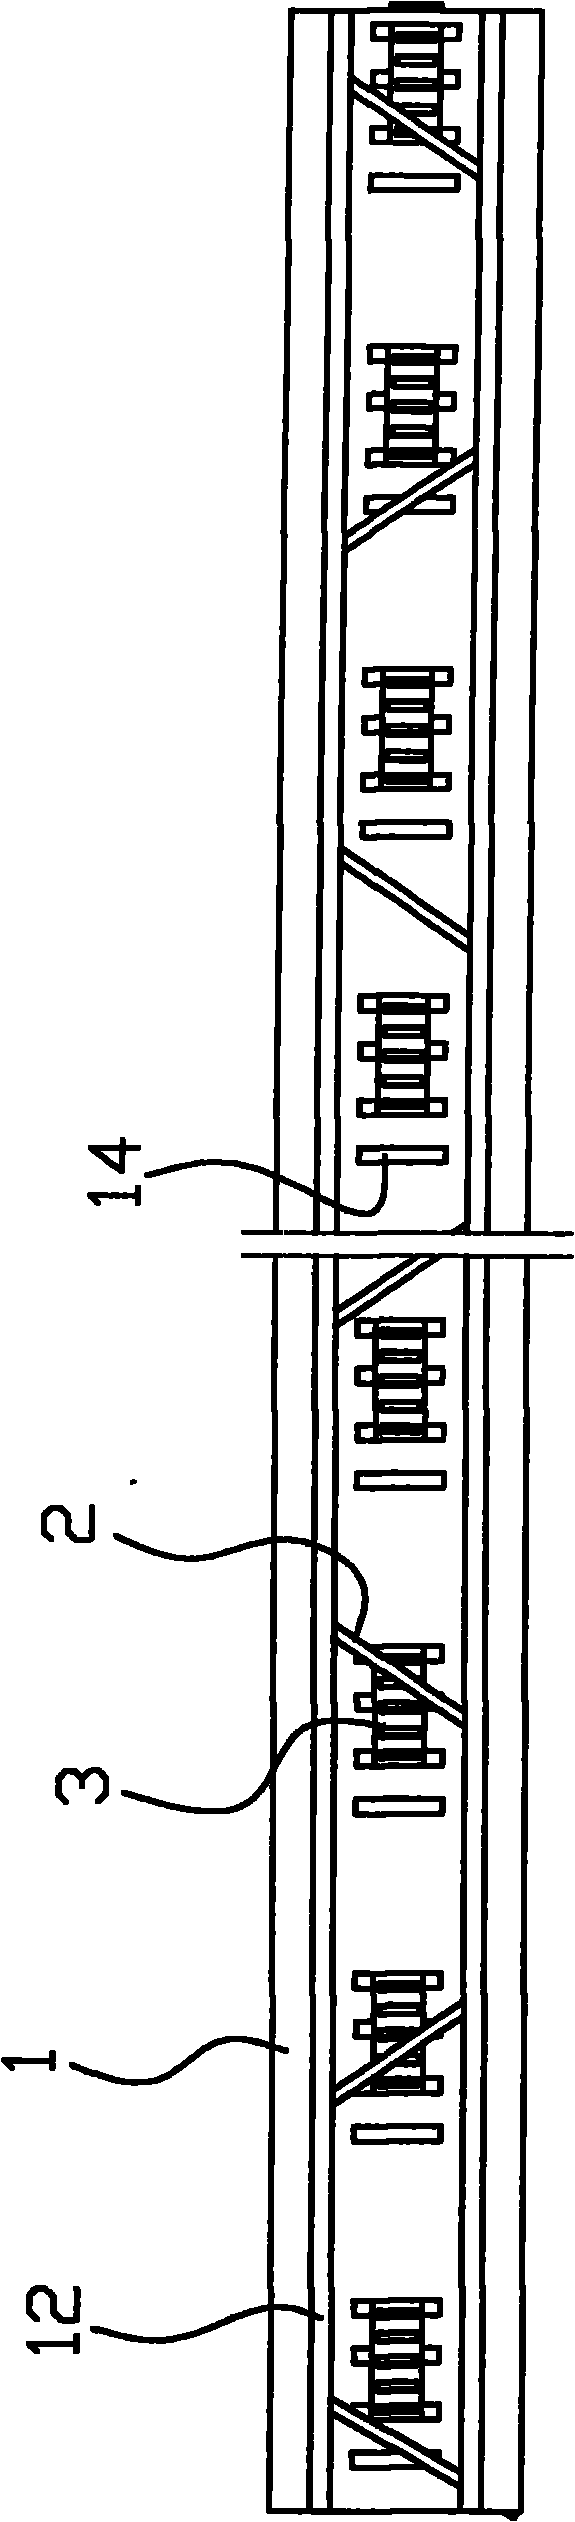 Clamping device for clamping films